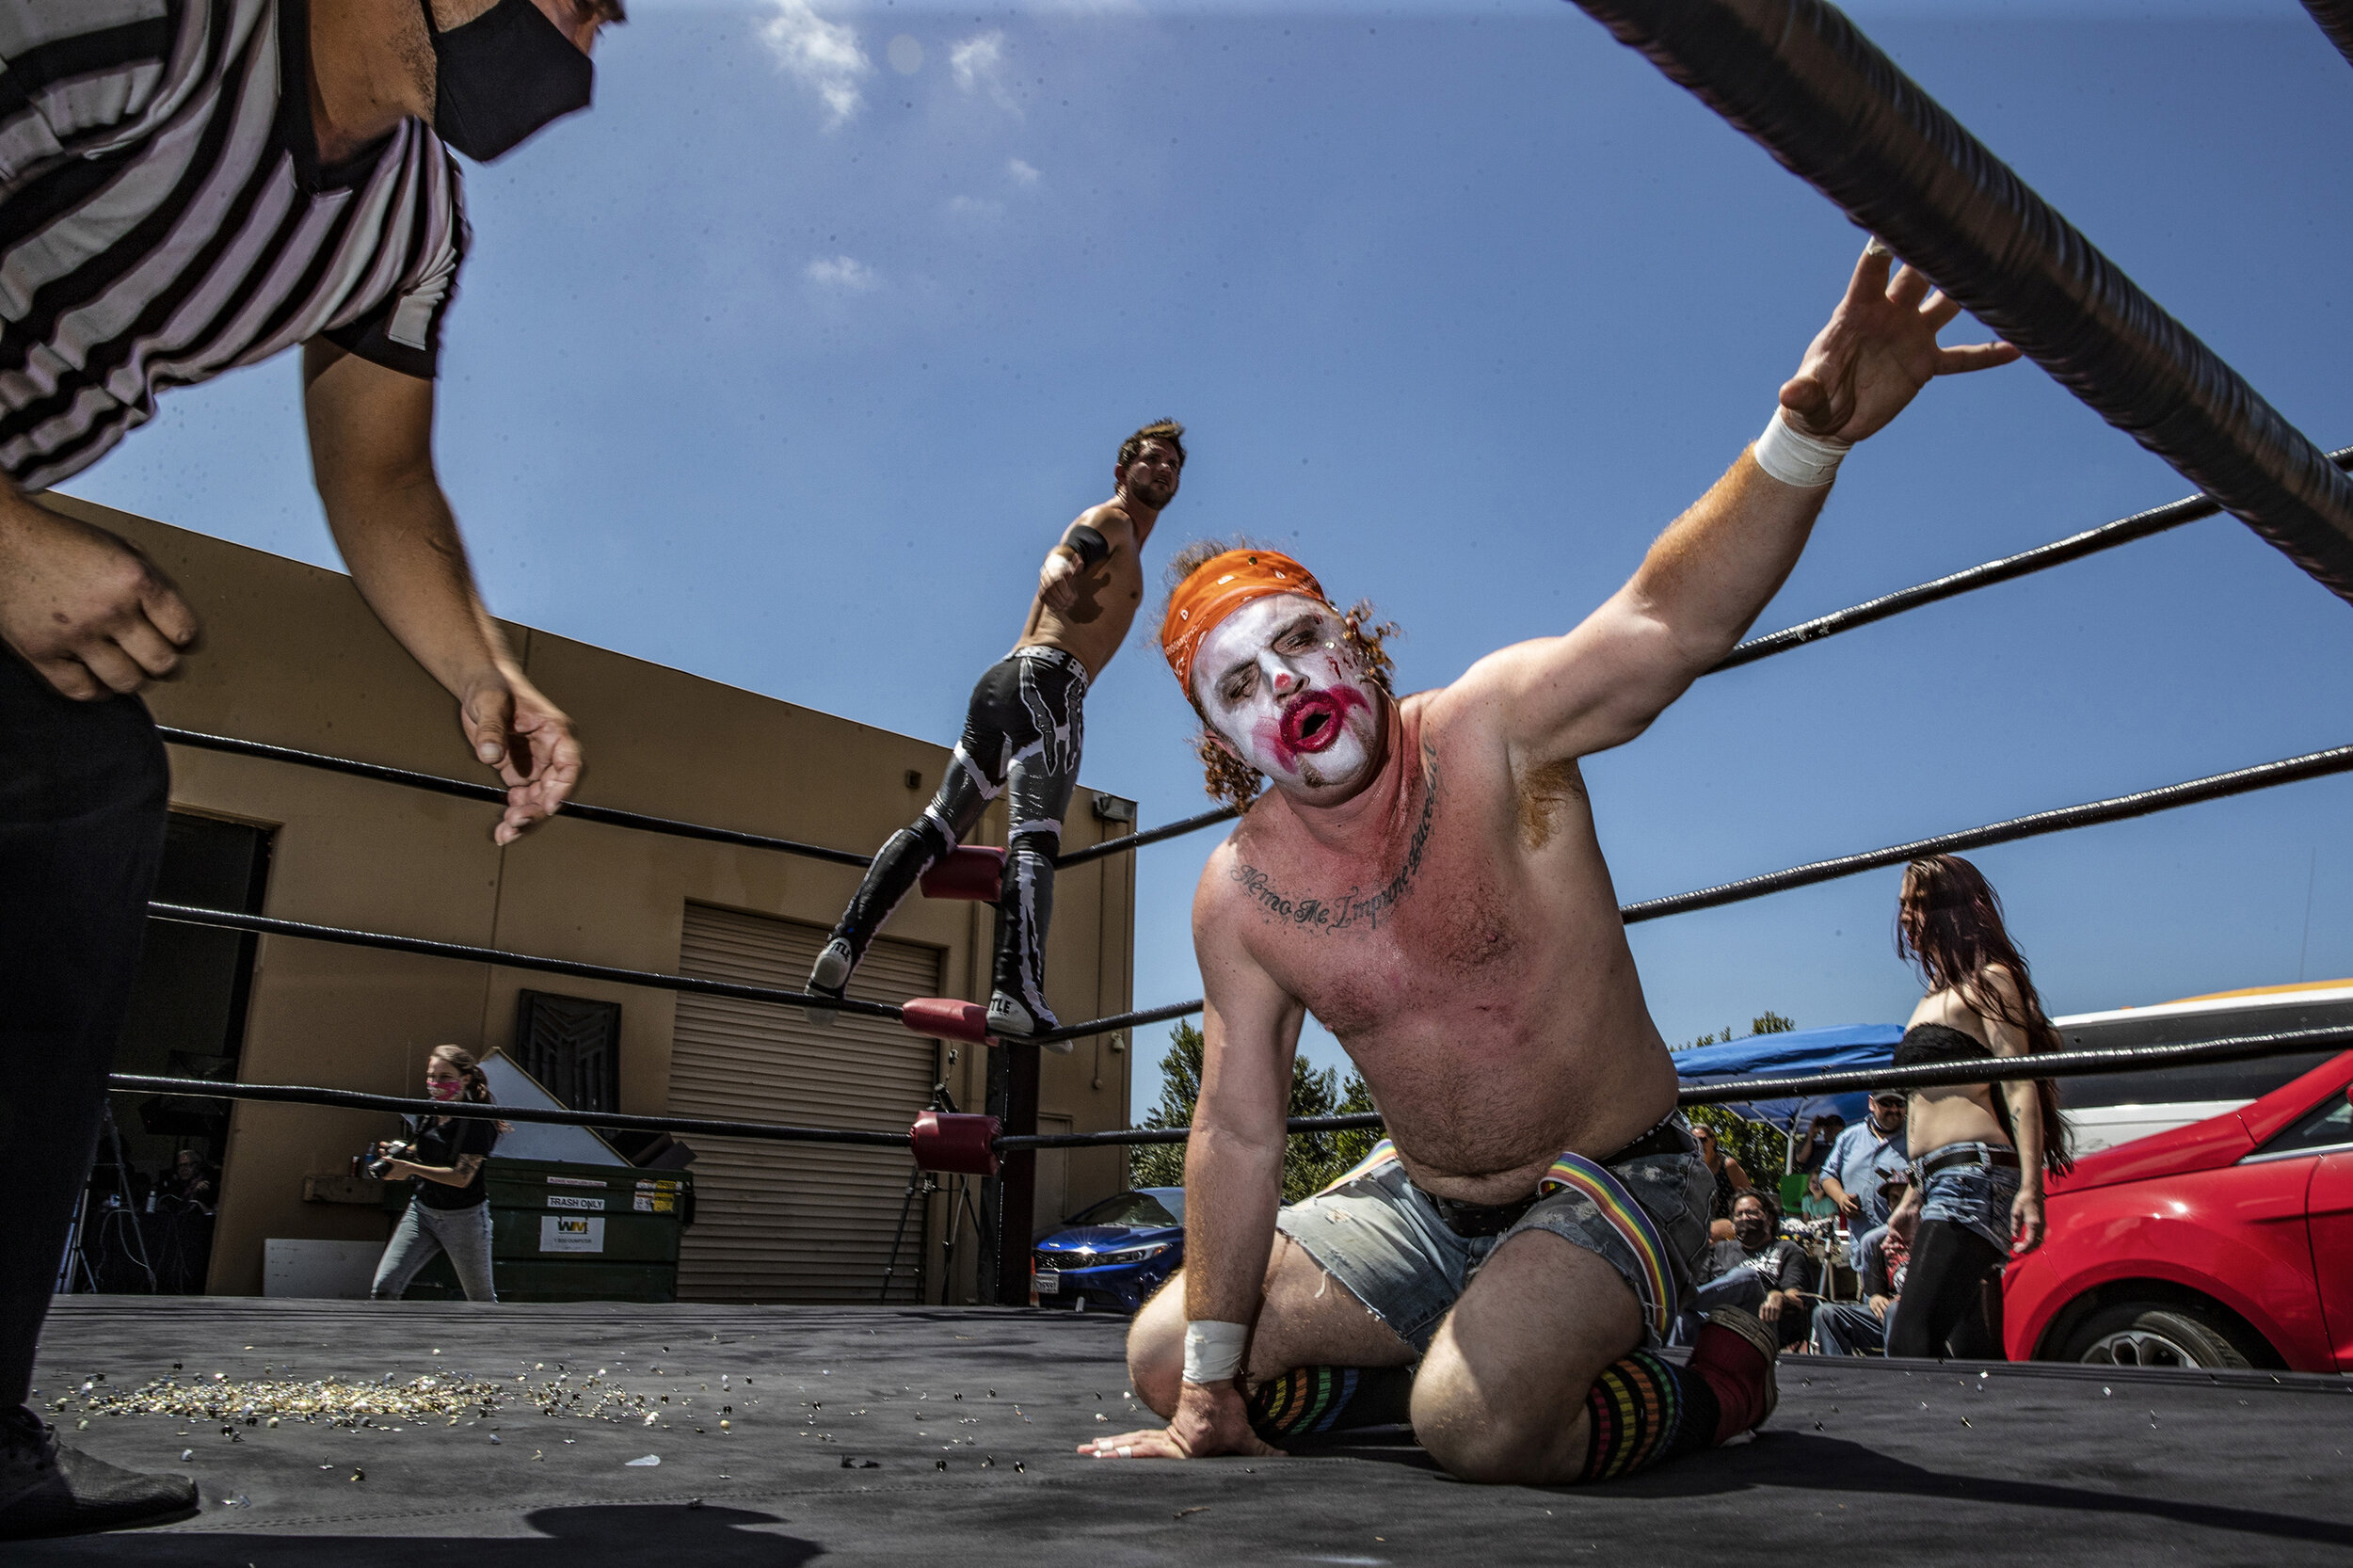  San Diego, CA, Saturday, May 23, 2020 - As the first wave of Covid-19 infections spread throughout the country, a San Diego based pro wrestling club known as FIST Combat, held a series of “drive in” events.  Despite government mandated “stay at home